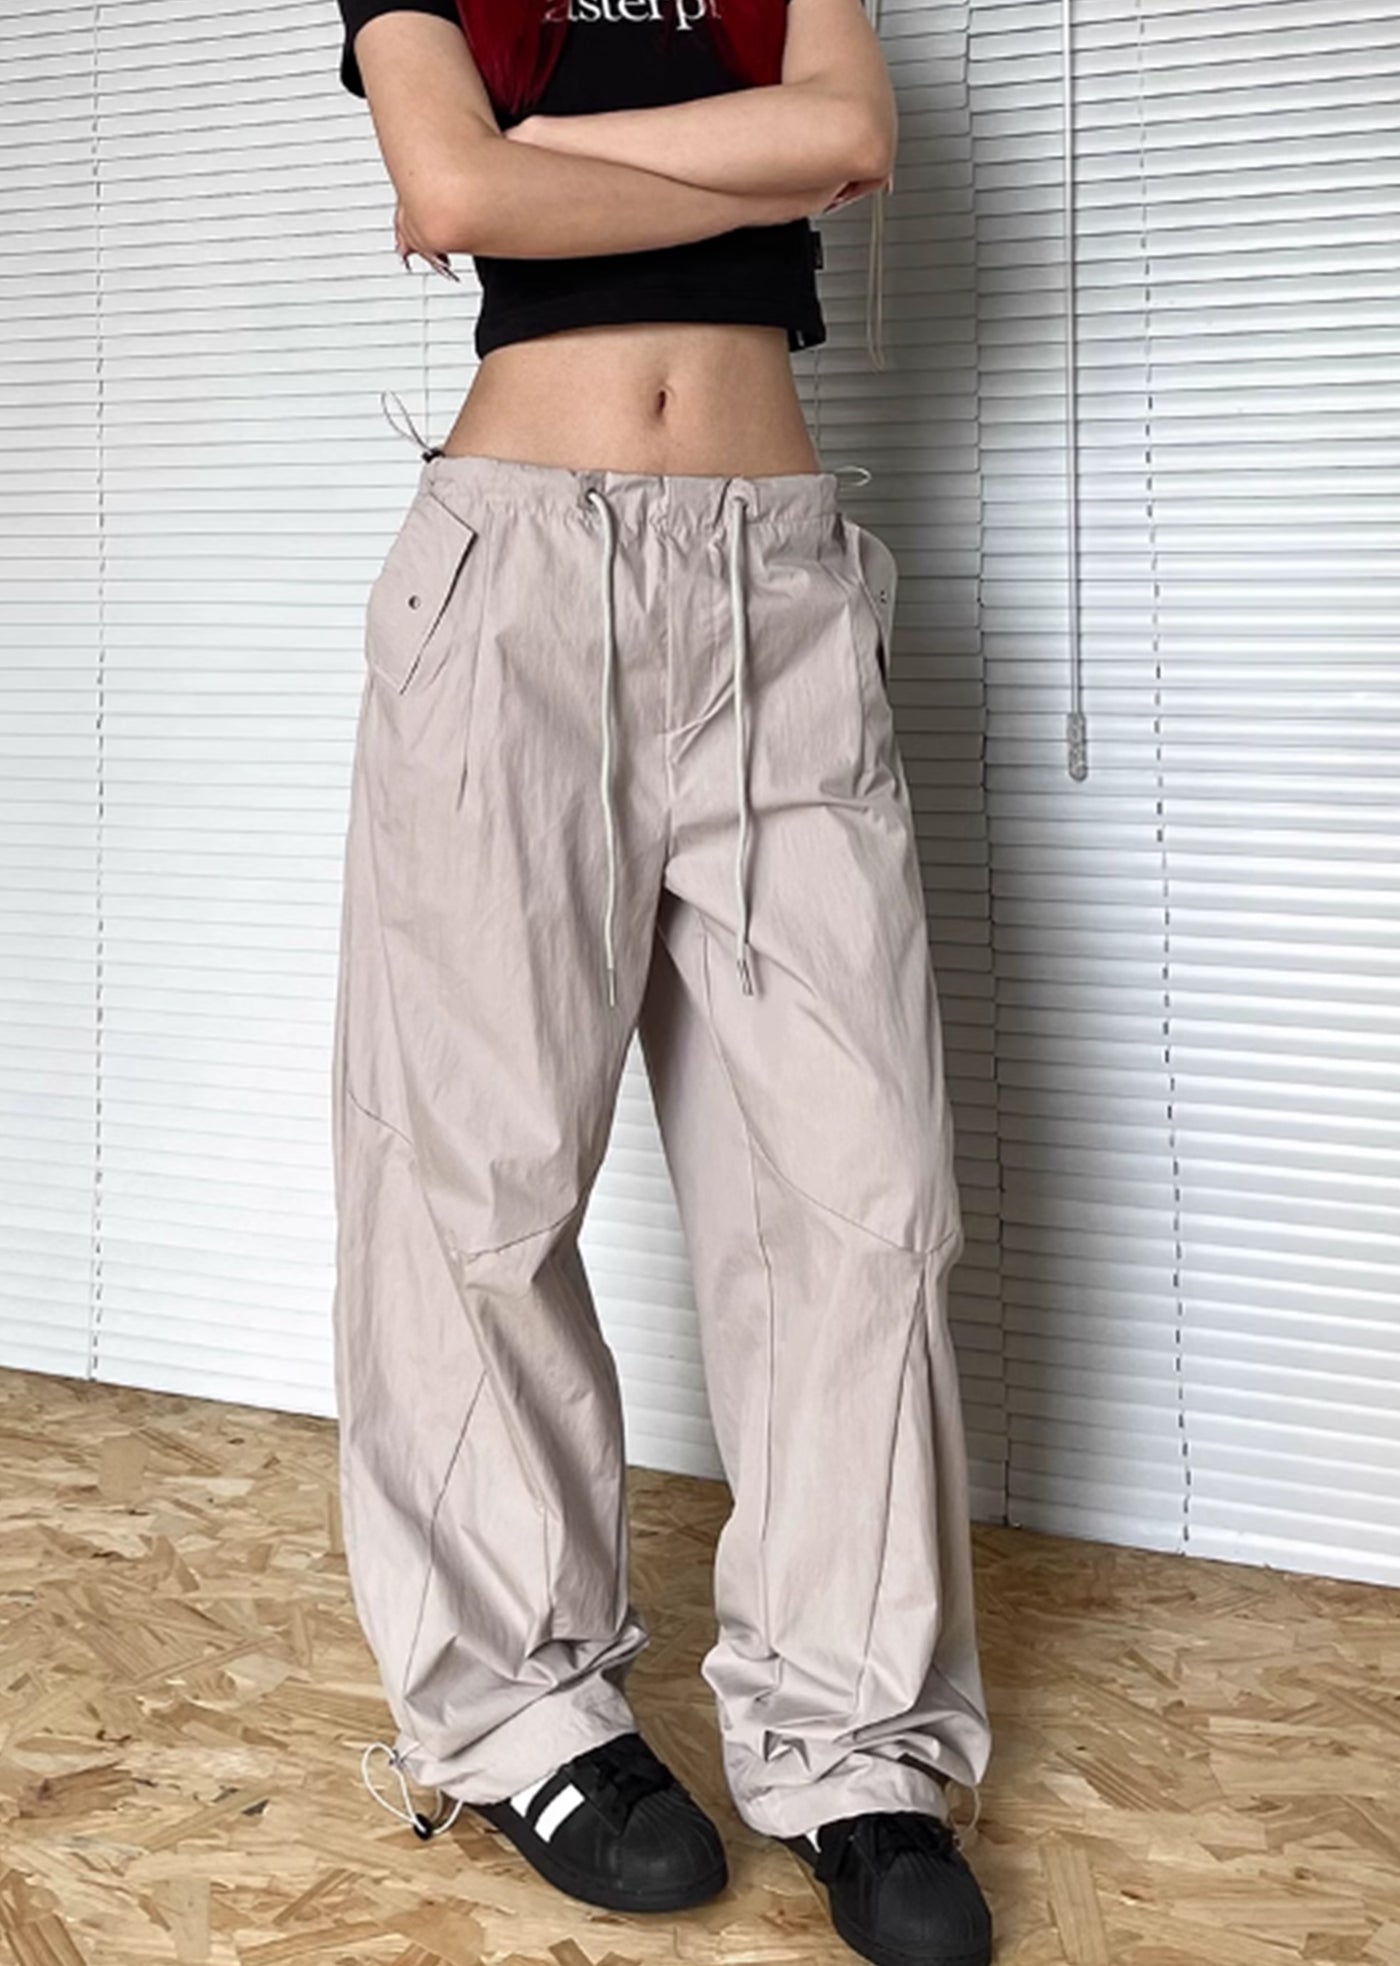 【Apocket】Dull and wrinkled street wide silhouette pants  AK0024